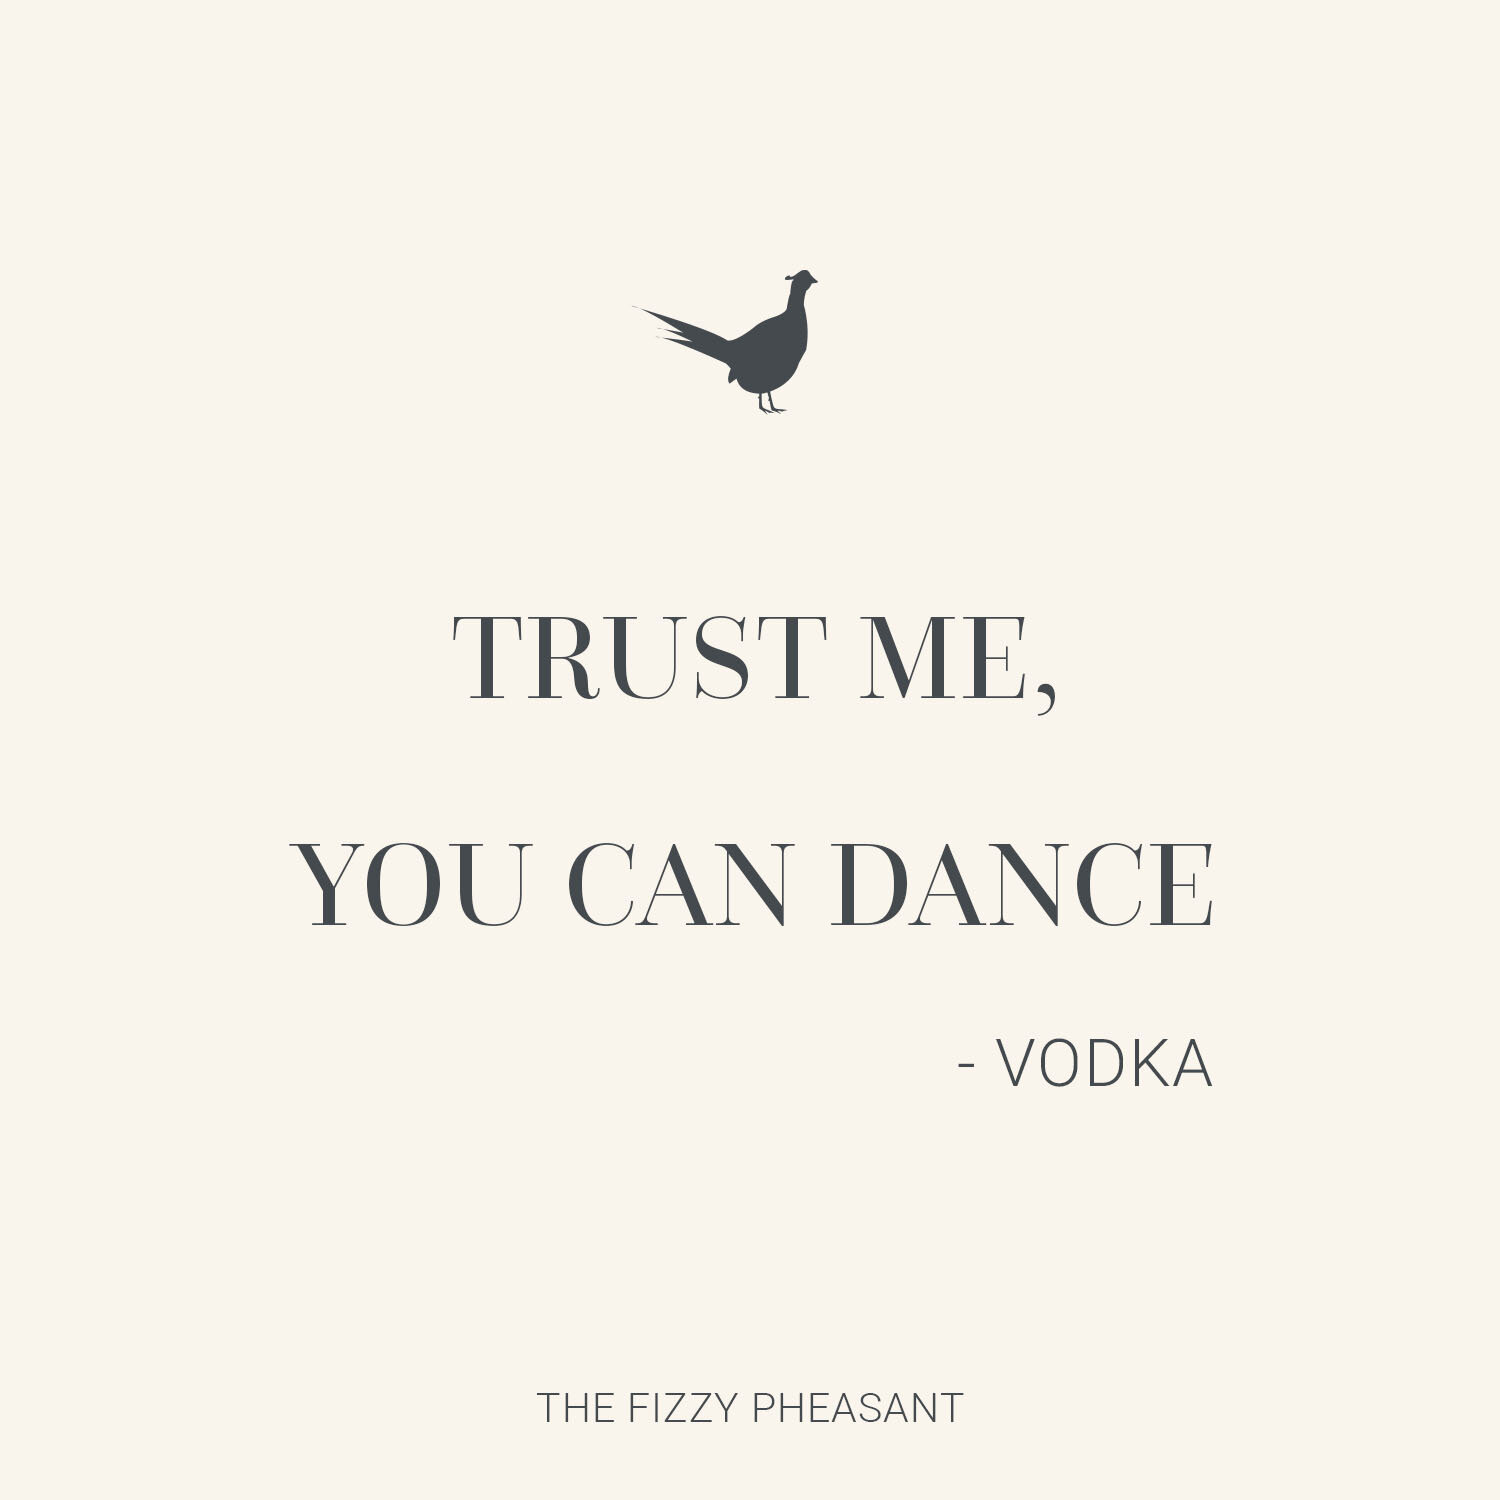 TRUST ME YOU CAN DANCE QUOTE - The Fizzy Pheasant.jpg